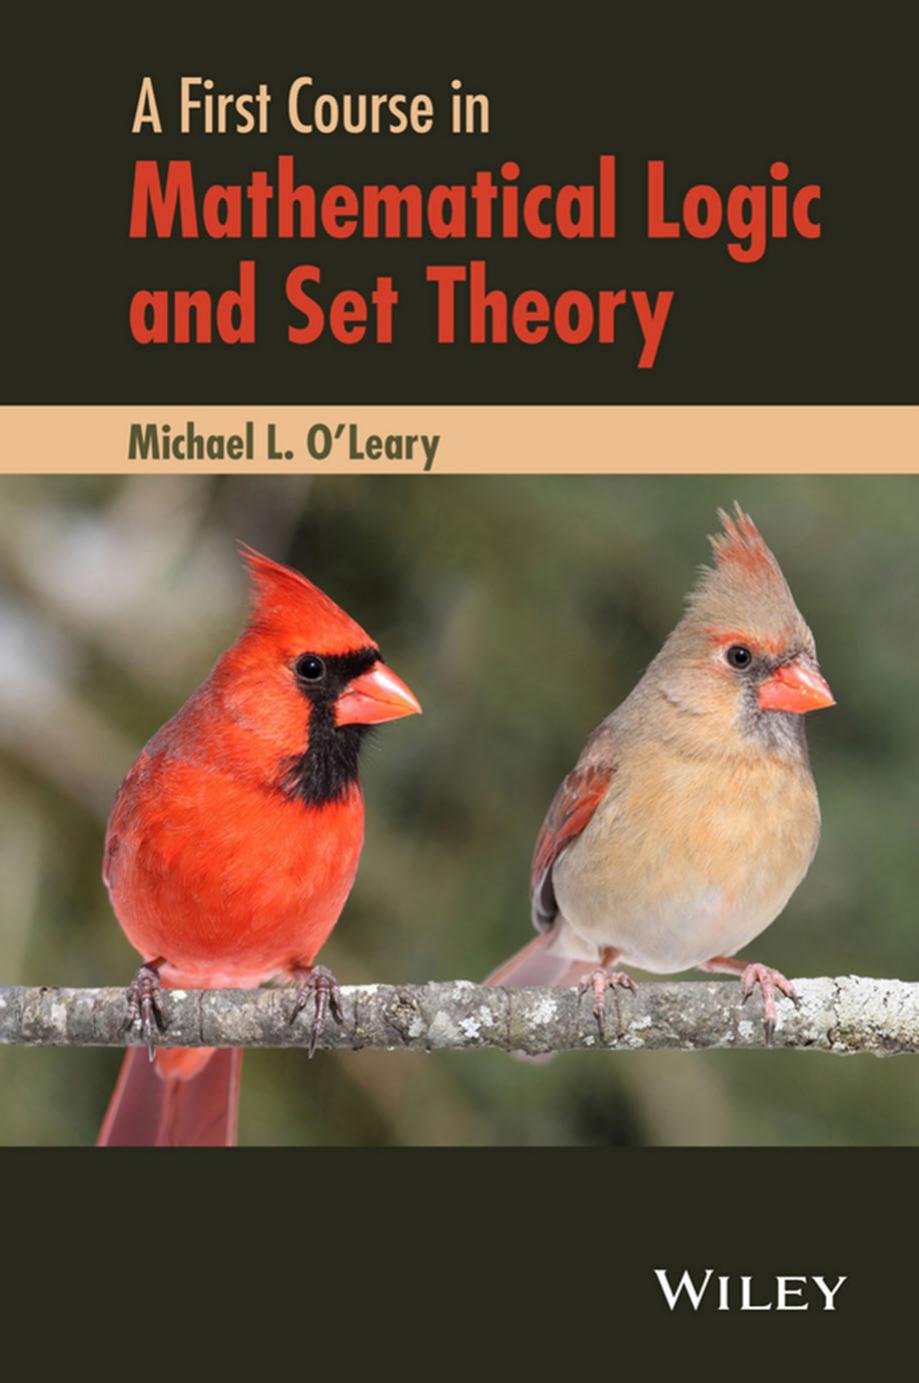 A first course in mathematical logic and set theory(2016